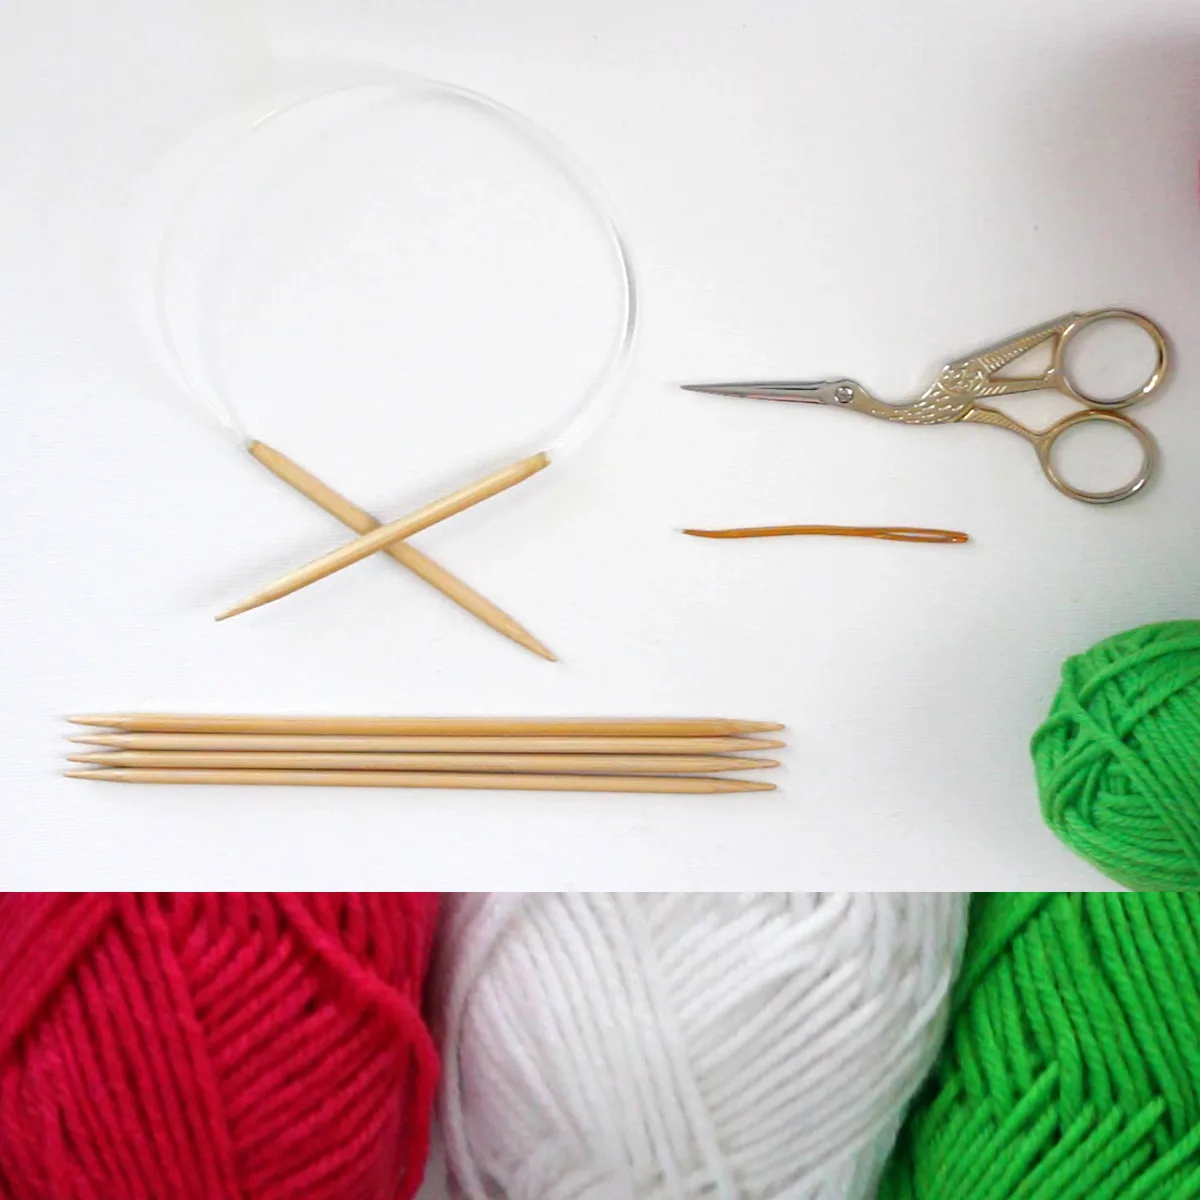 Knitting supplies with circular needle, scissors, double-pointed needles, tapestry needle, and yarn in colors red, white, and green.